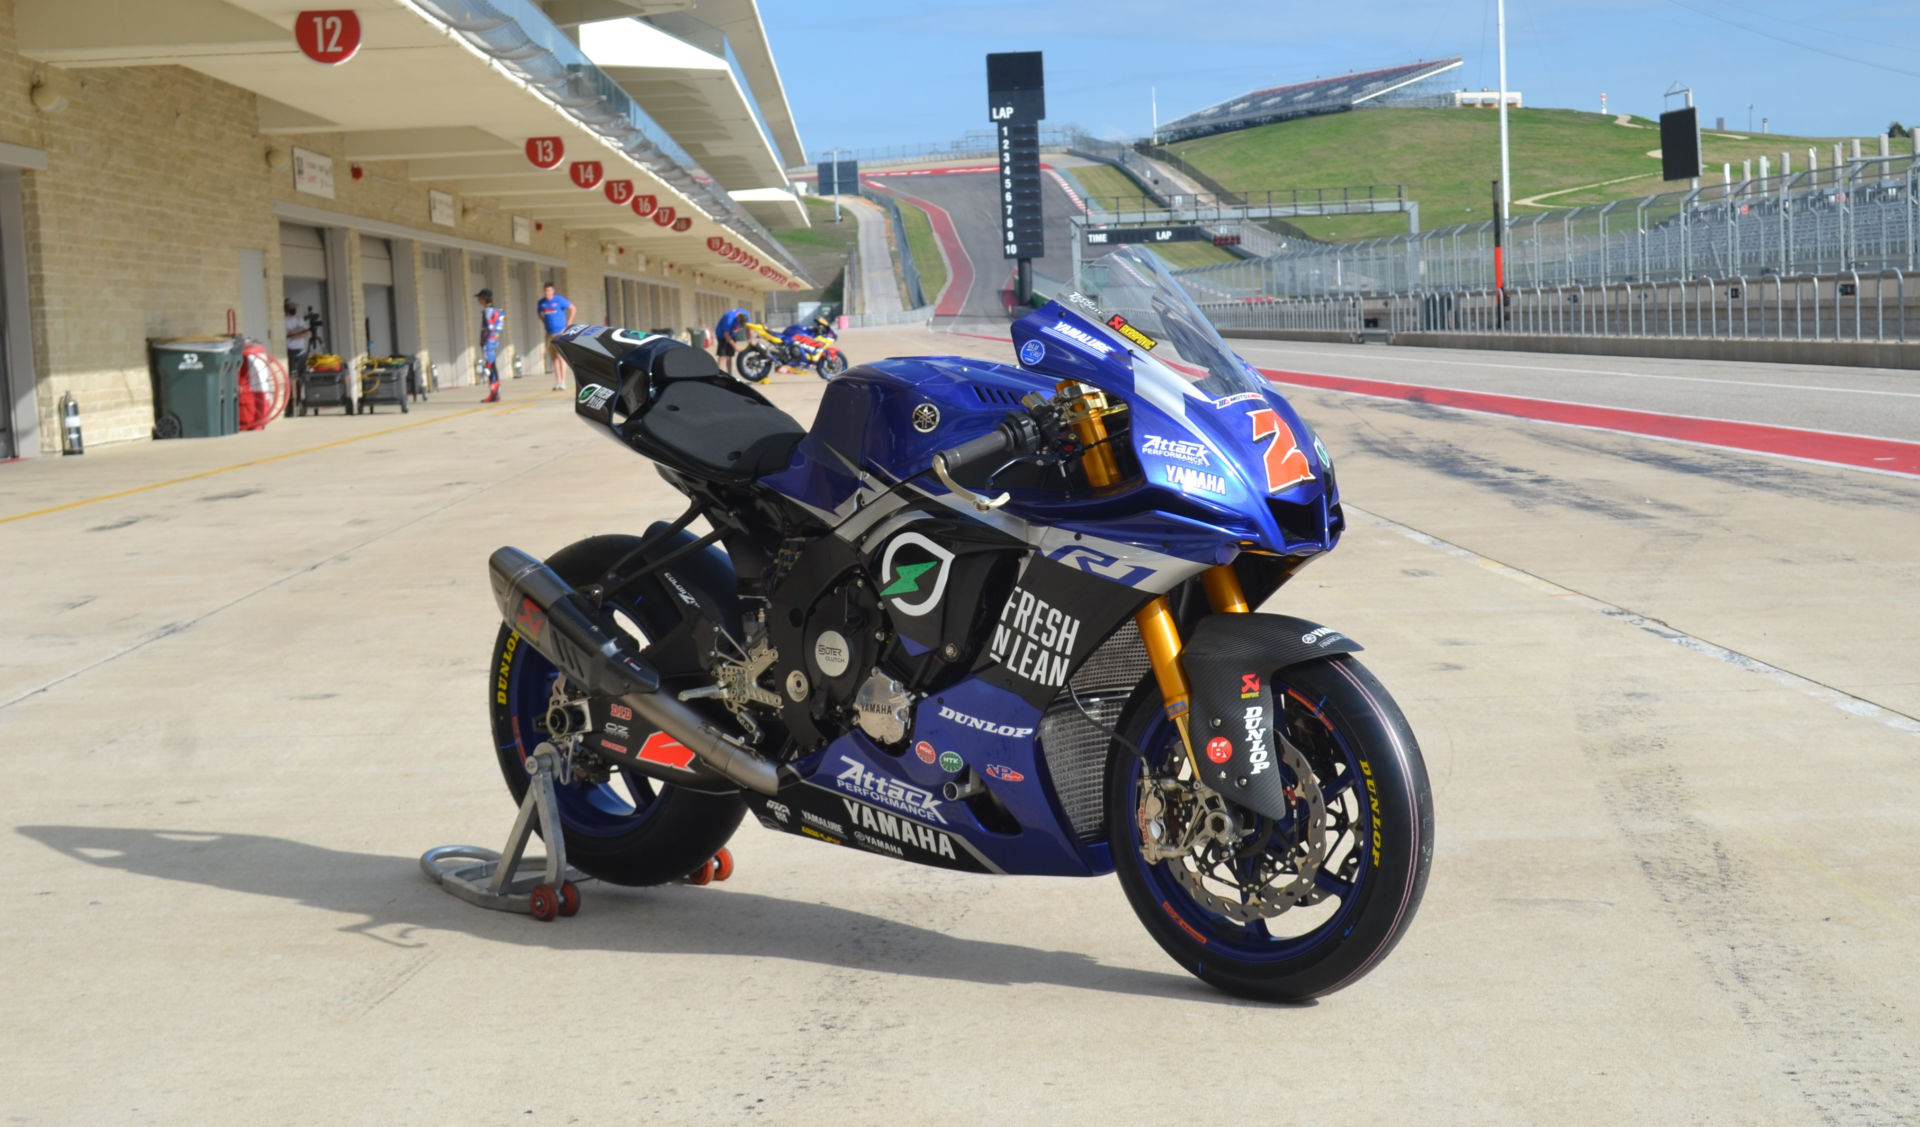 Josh Herrin's Fresh N' Lean Attack Performance Yamaha YZF-R1 positioned on pit lane at COTA for promotional photos. Photo by David Swarts.